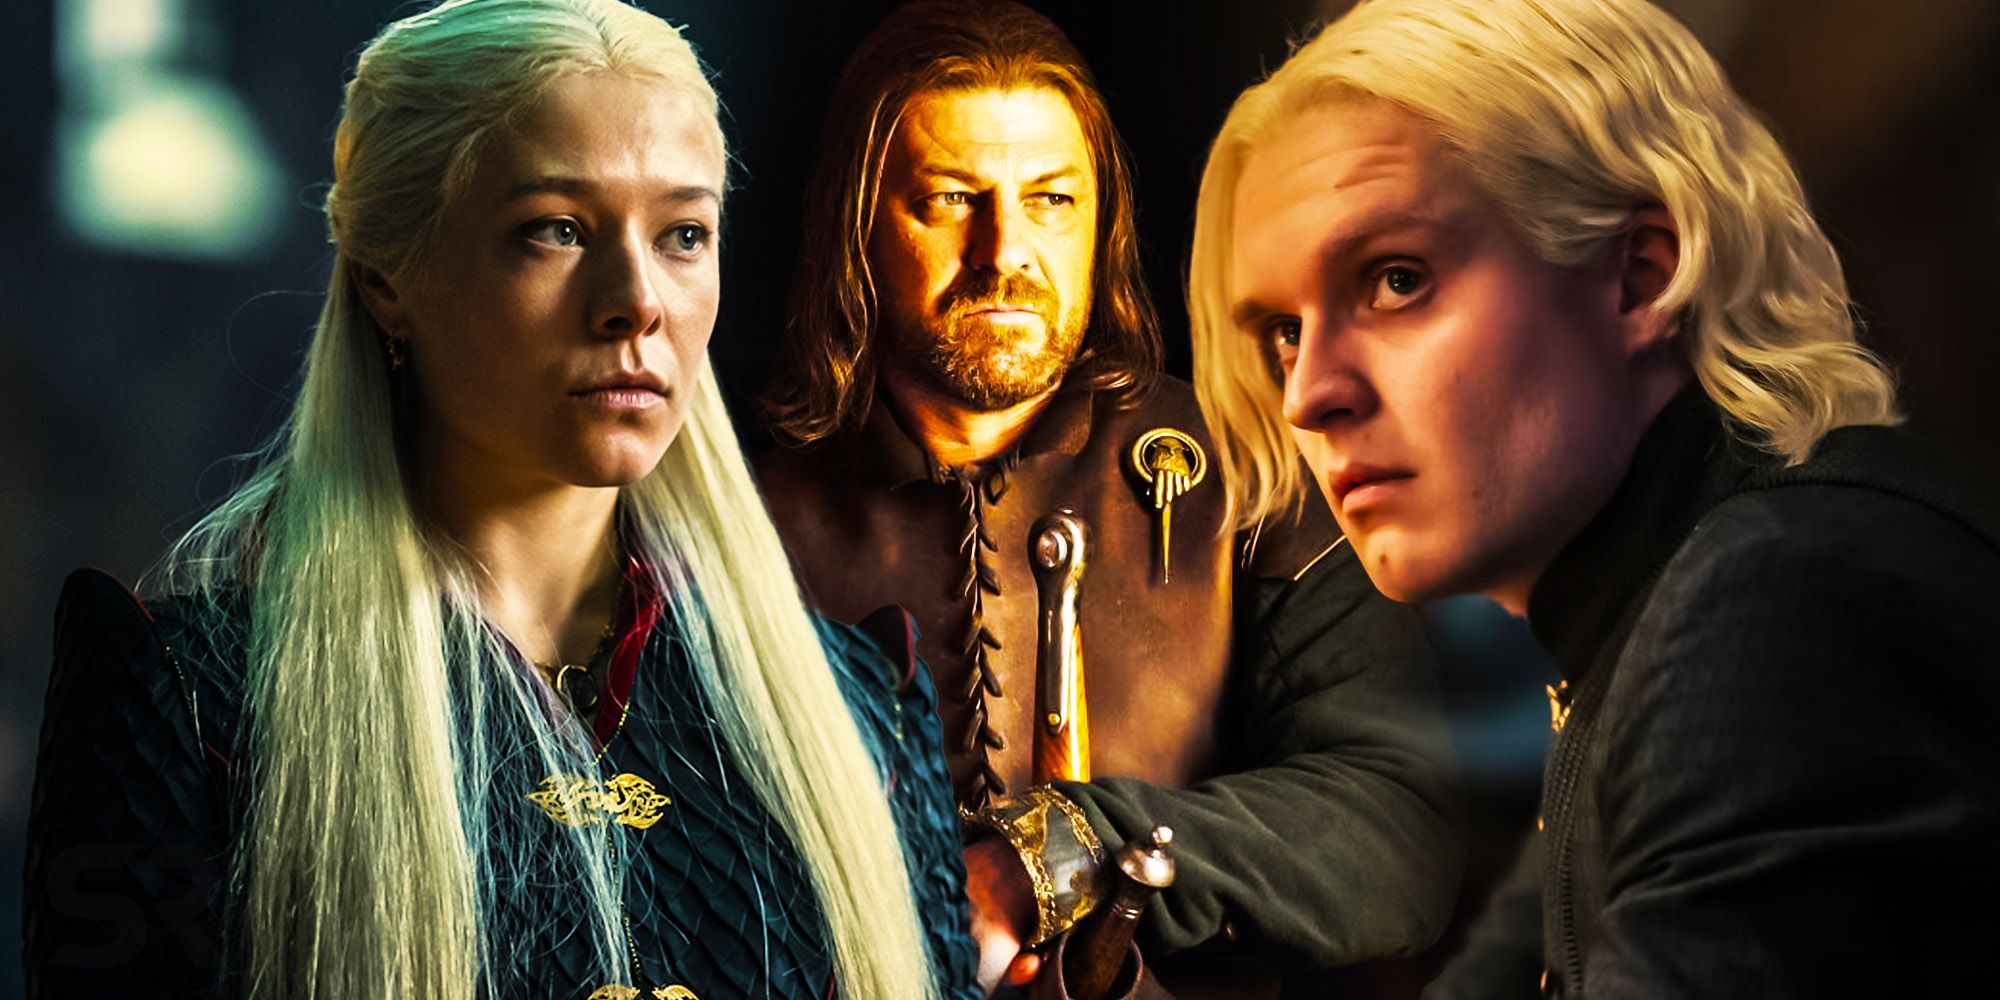 House of the Dragon's Rhaenyra, Aegon and Ned Stark from Game of Thrones.